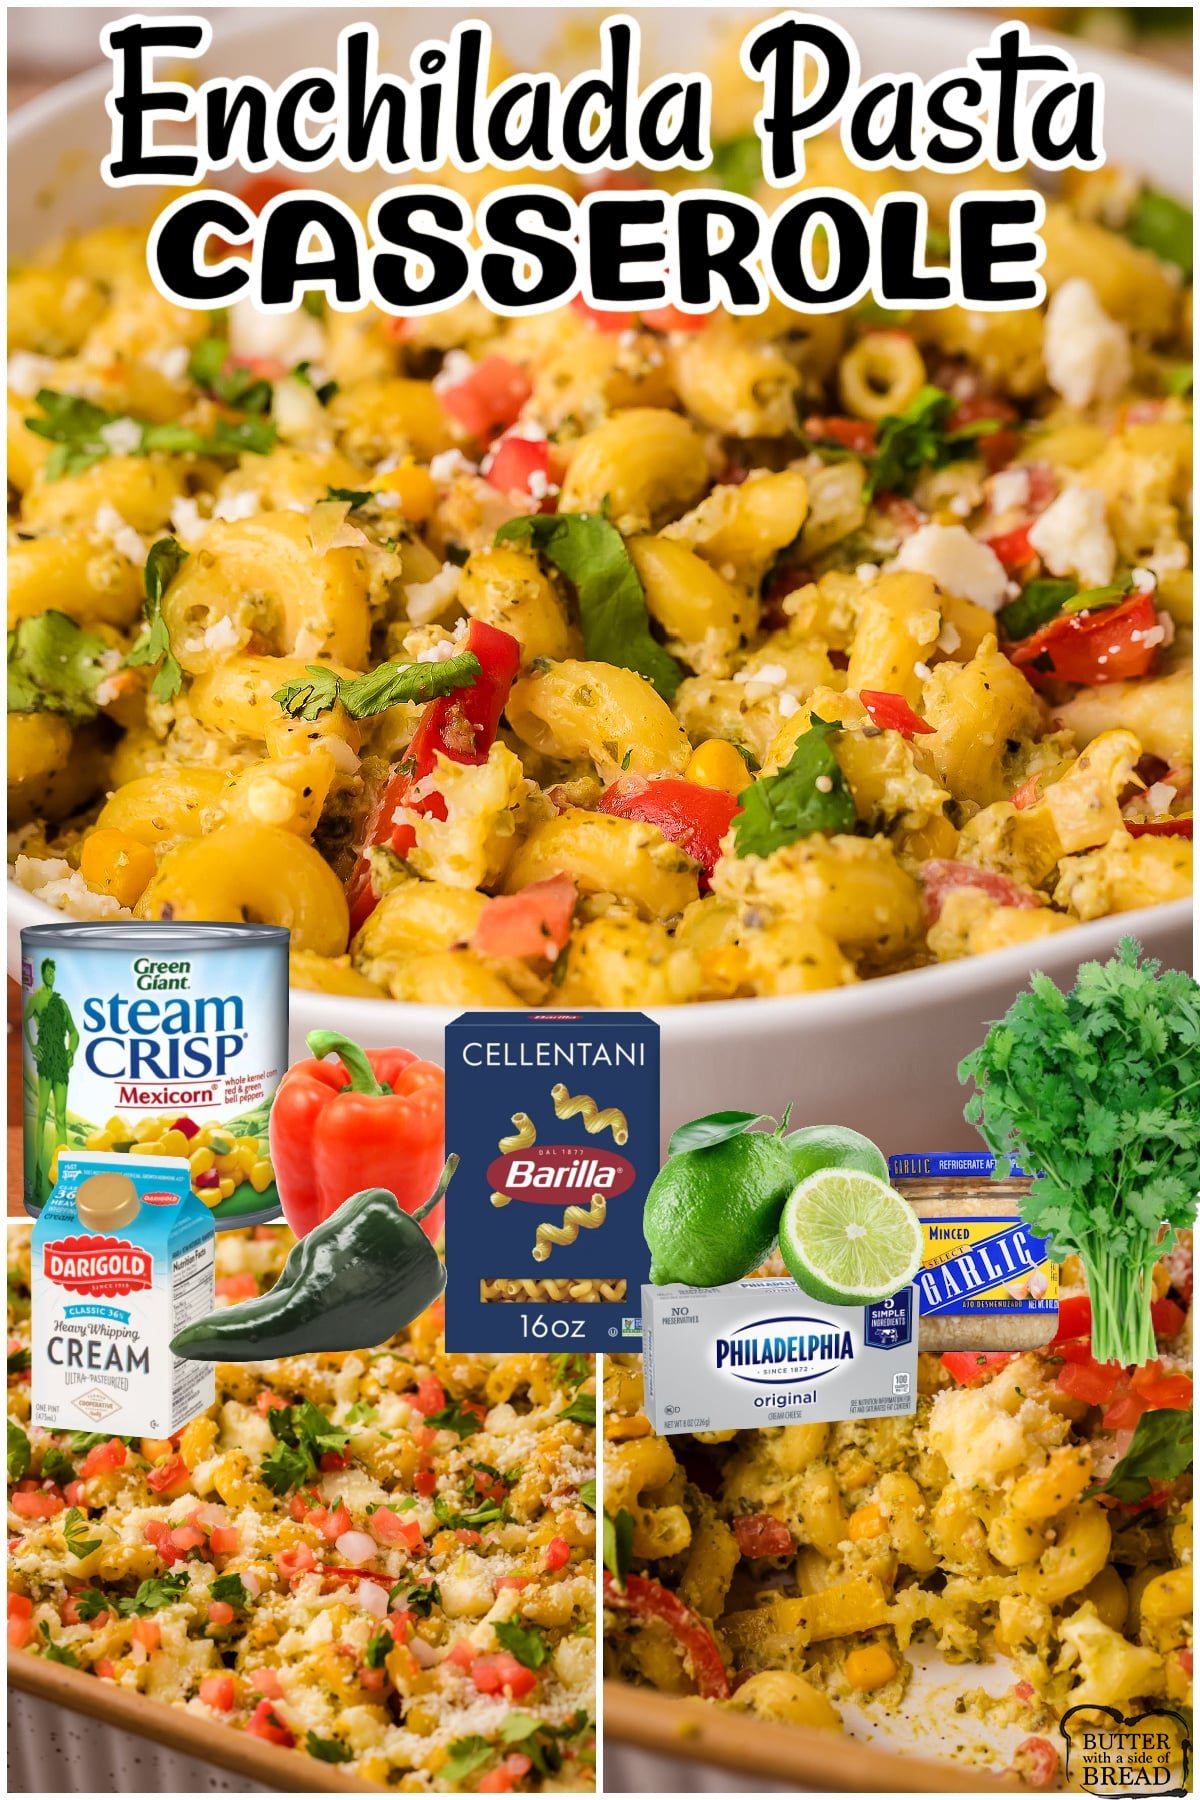 Enchilada Pasta Casserole made with pasta, peppers, corn & Pico de Gallo, topped with an incredible creamy cilantro lime sauce & baked with cheese! This pasta casserole is an amazing twist on classic enchiladas! 